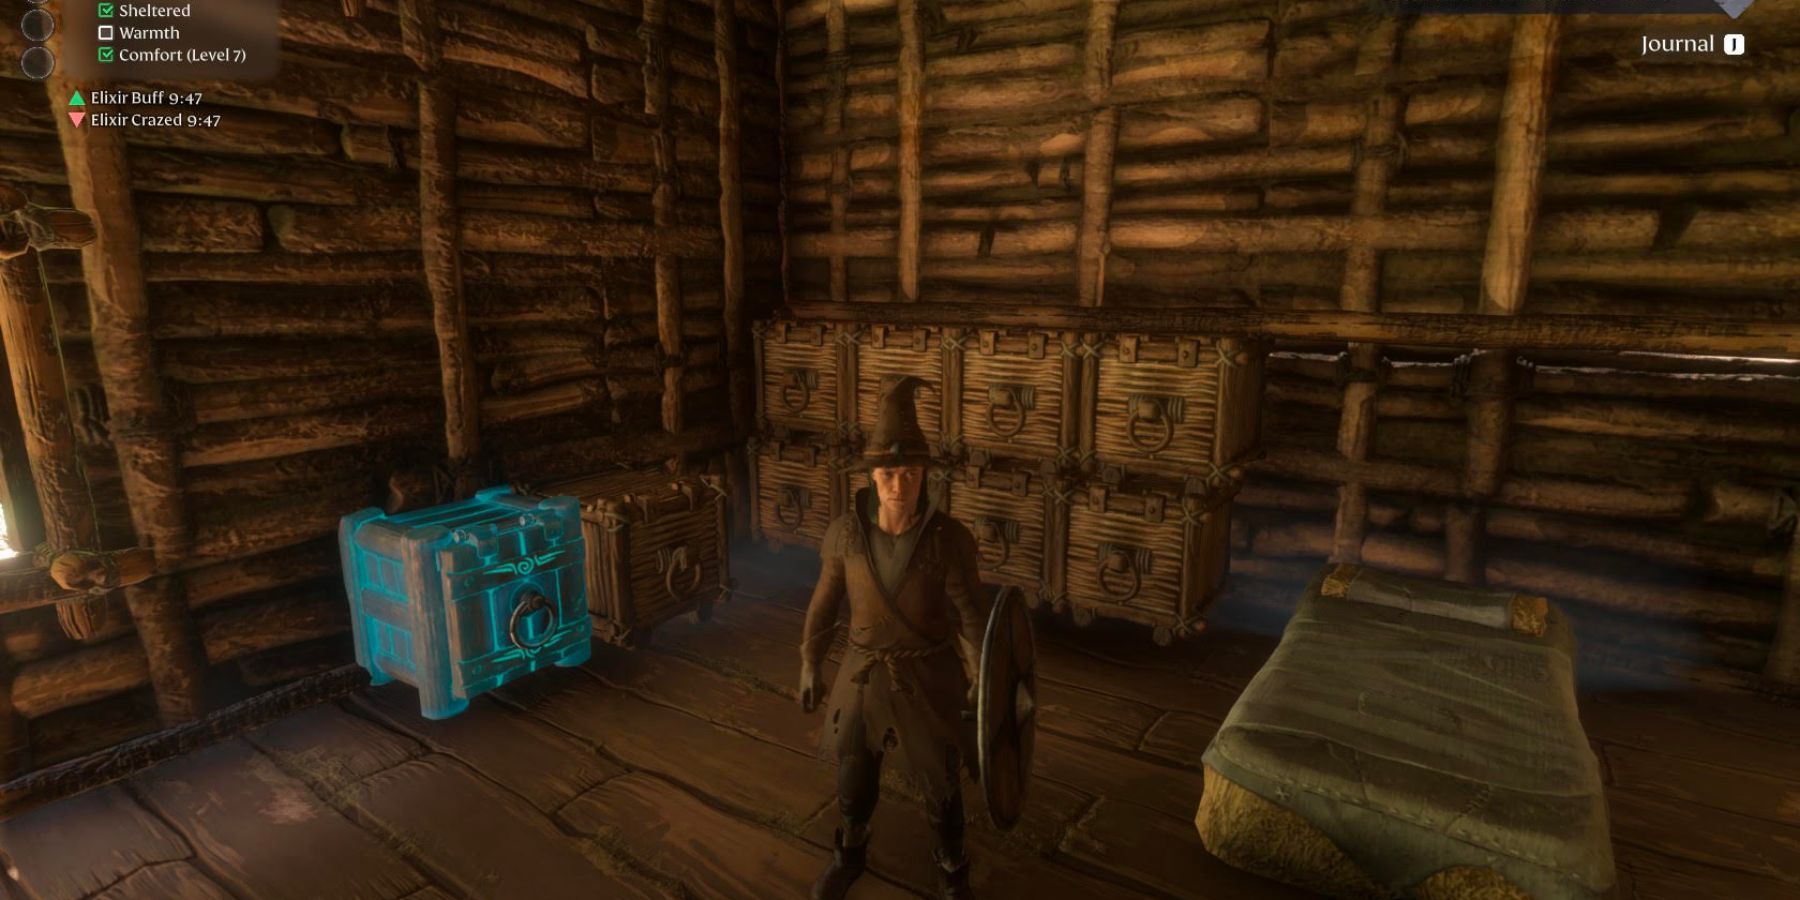 players standing in front of chests enshrouded